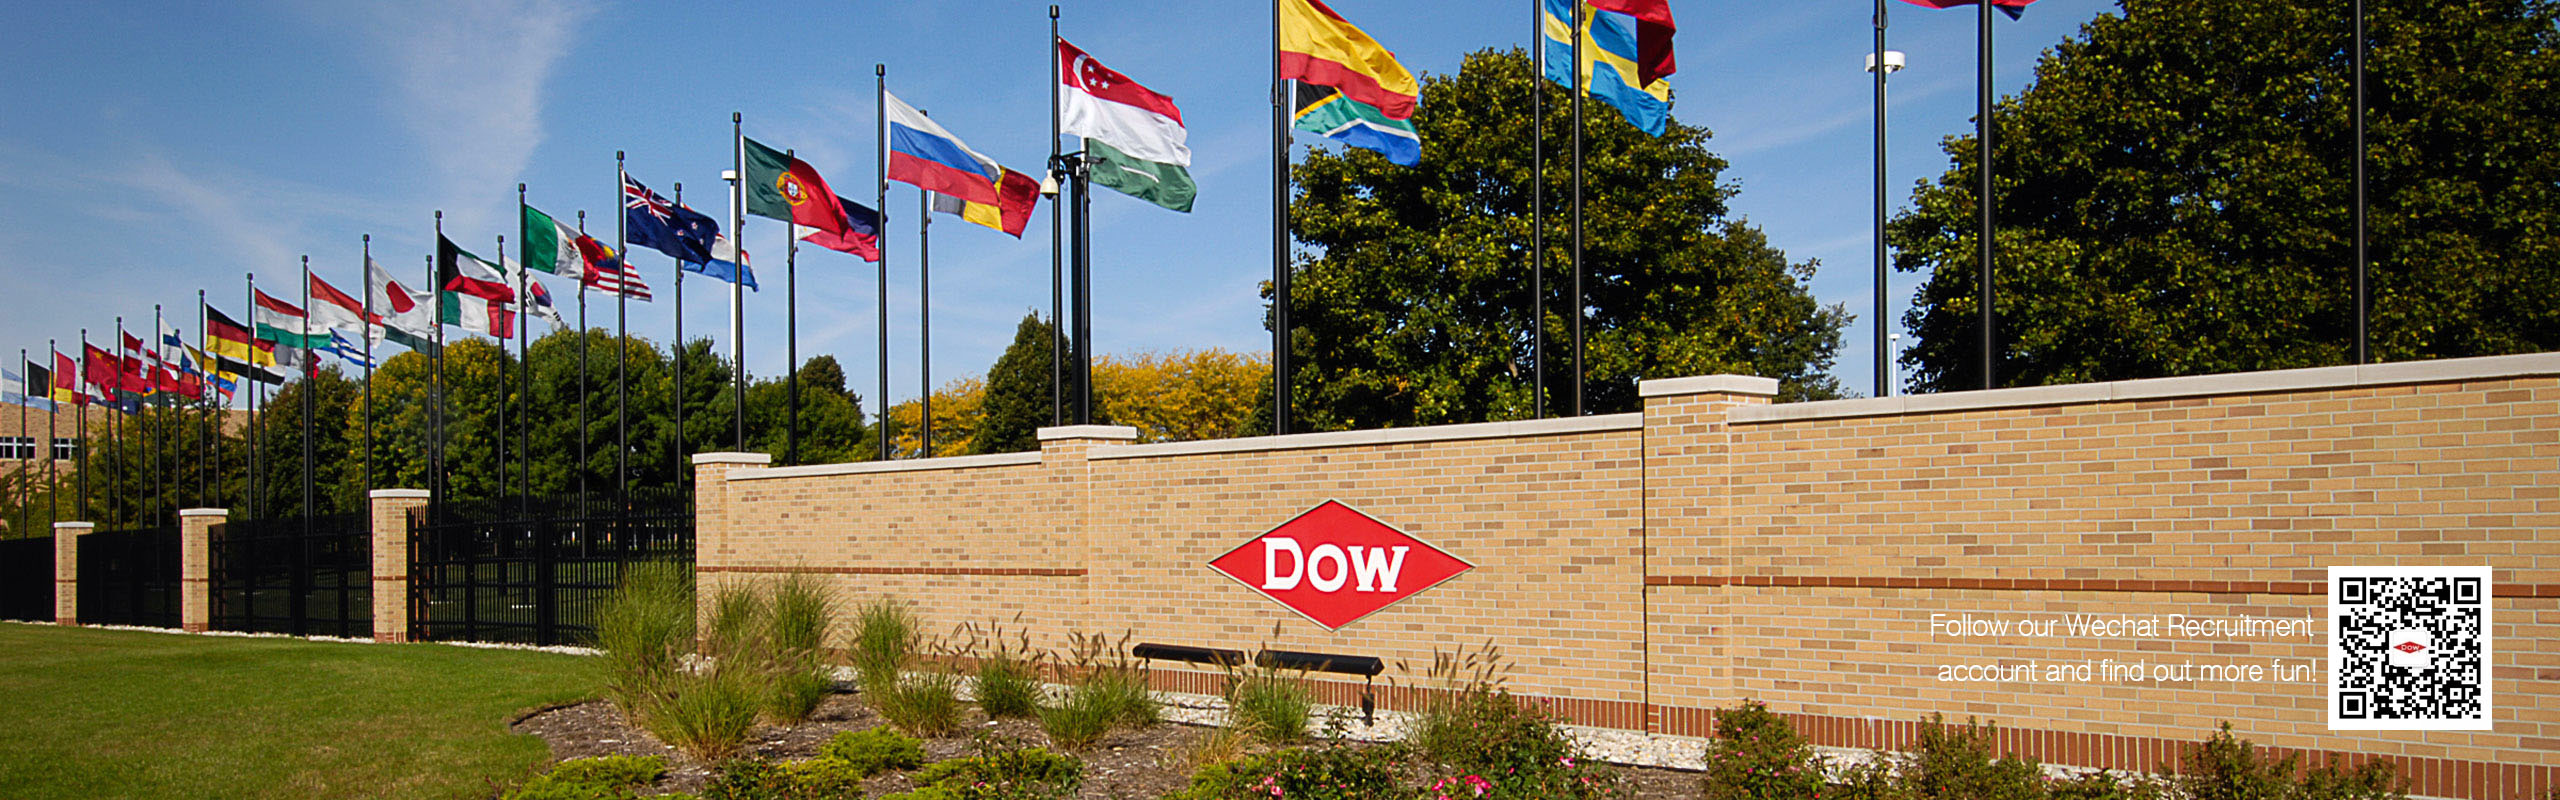 flags of the world at the Dow headquarters in Midland, MI USA